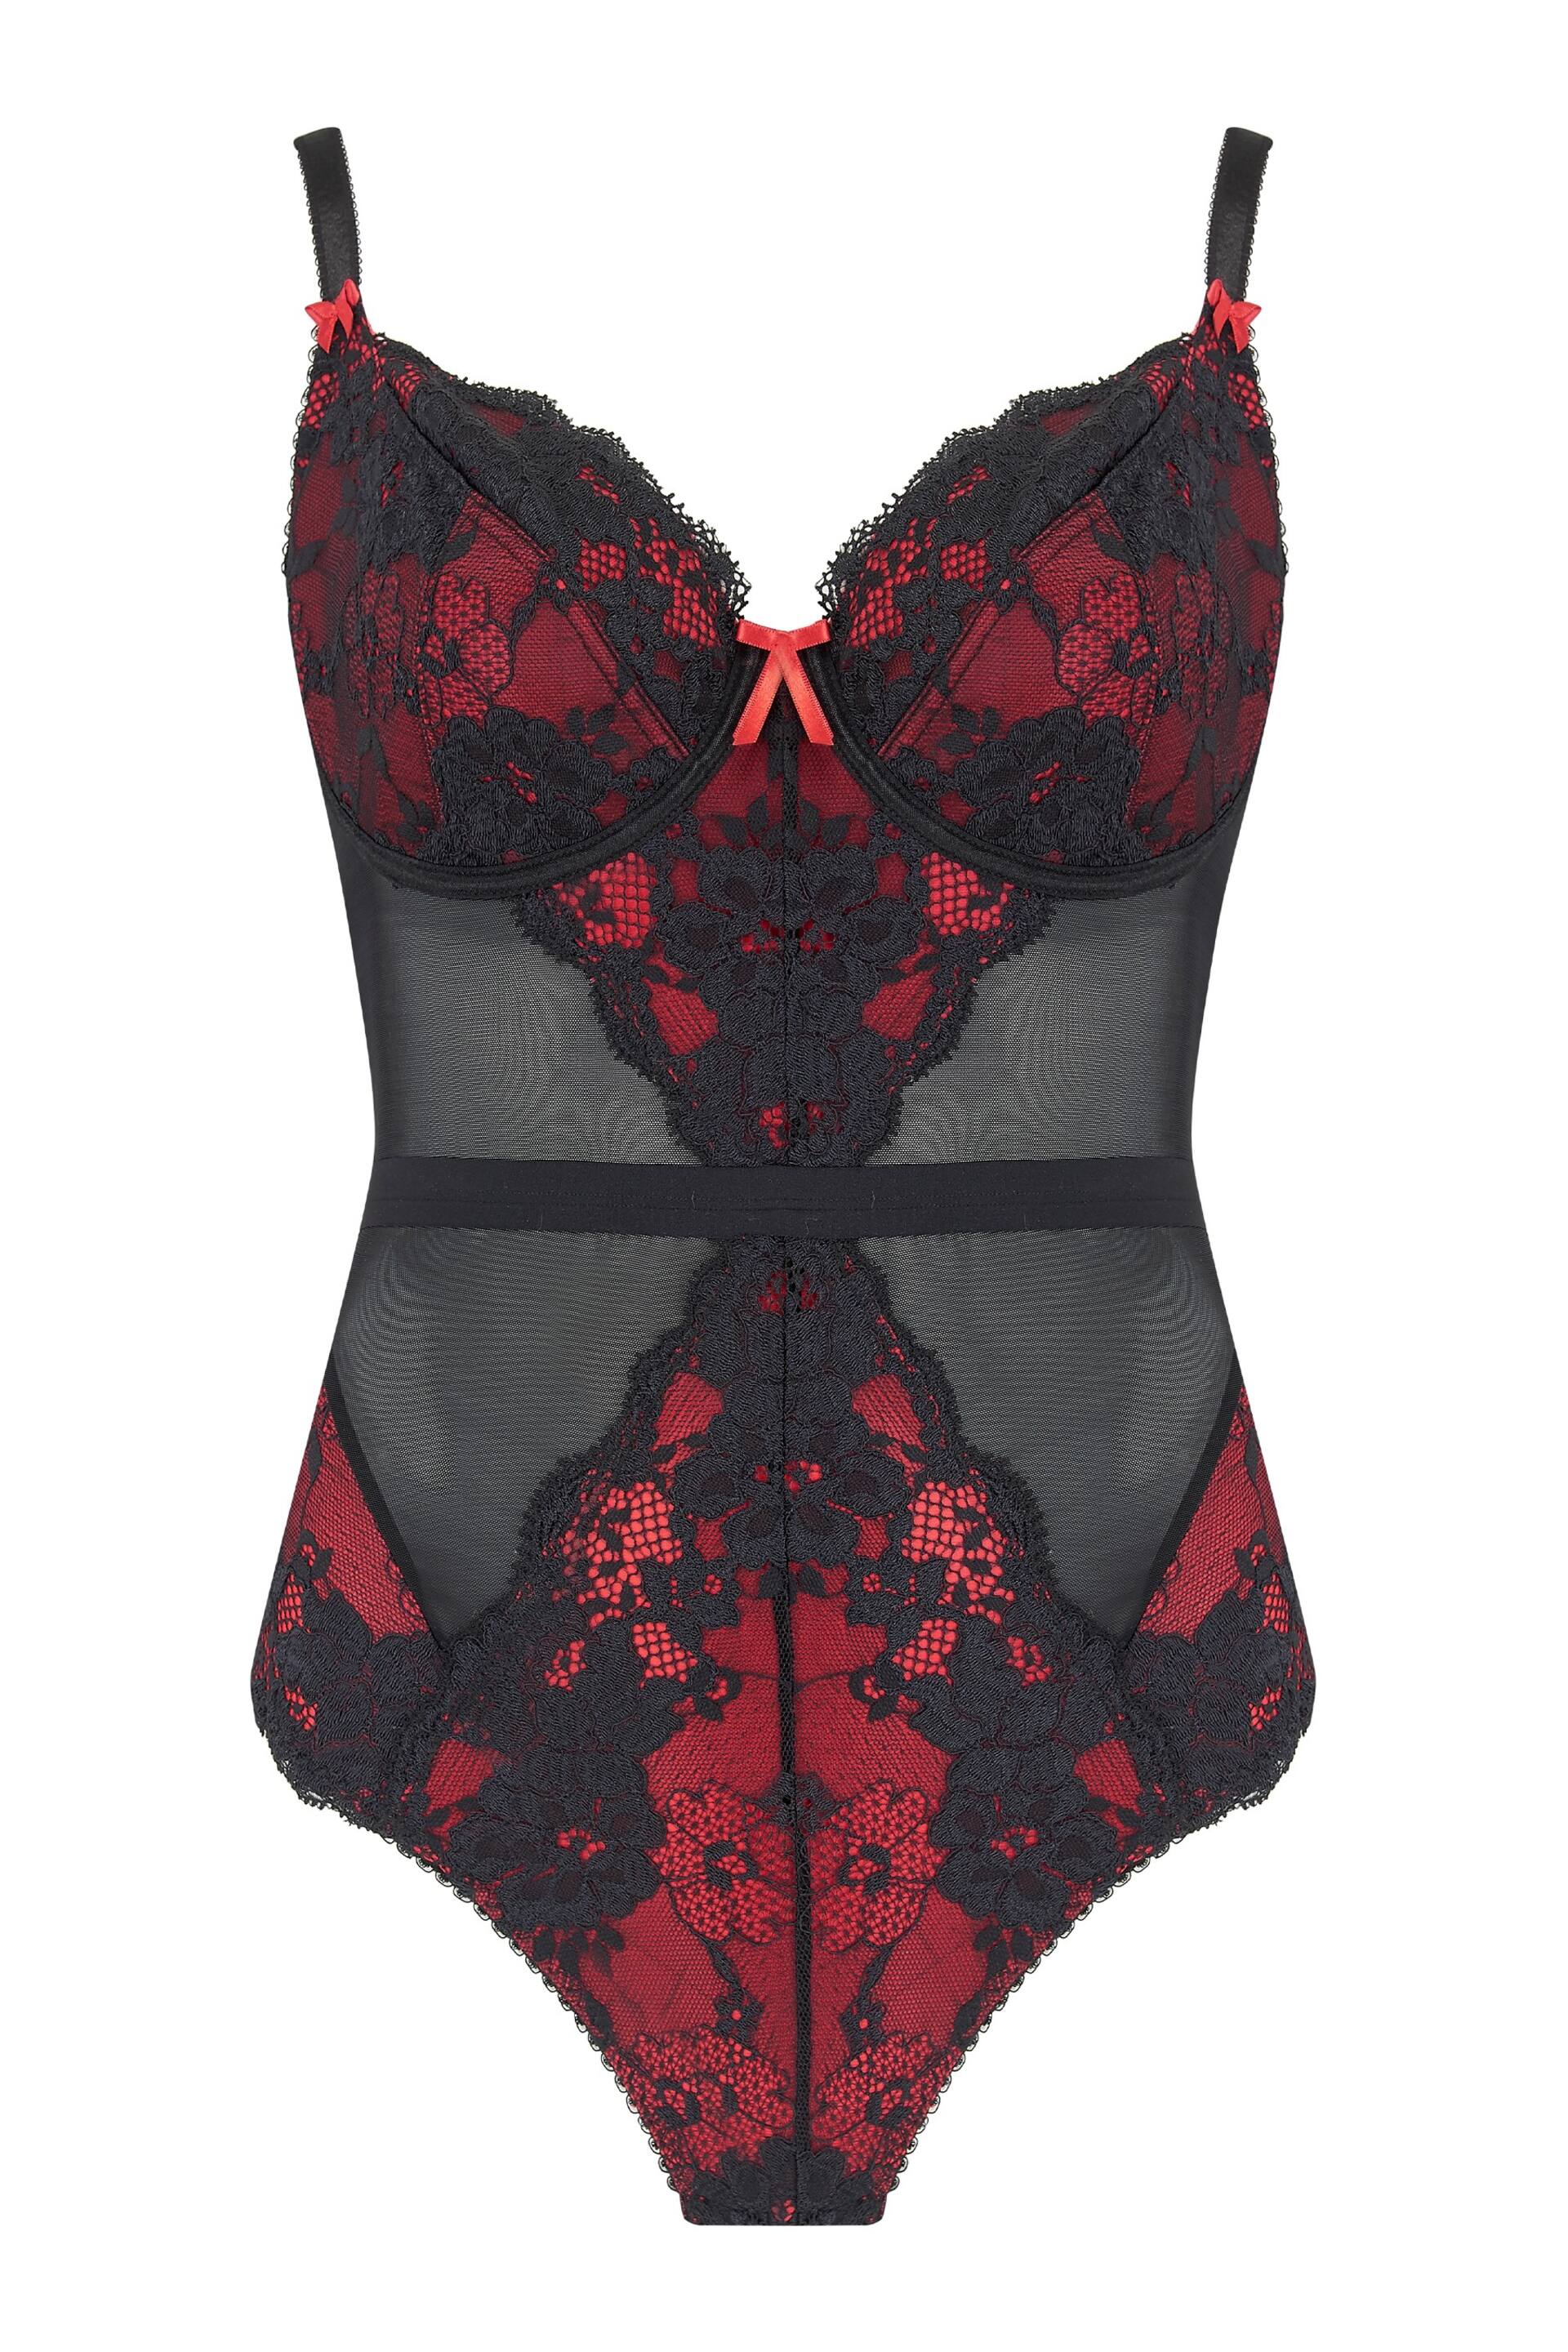 Pour Moi Black Amour Underwired Body - Image 2 of 3